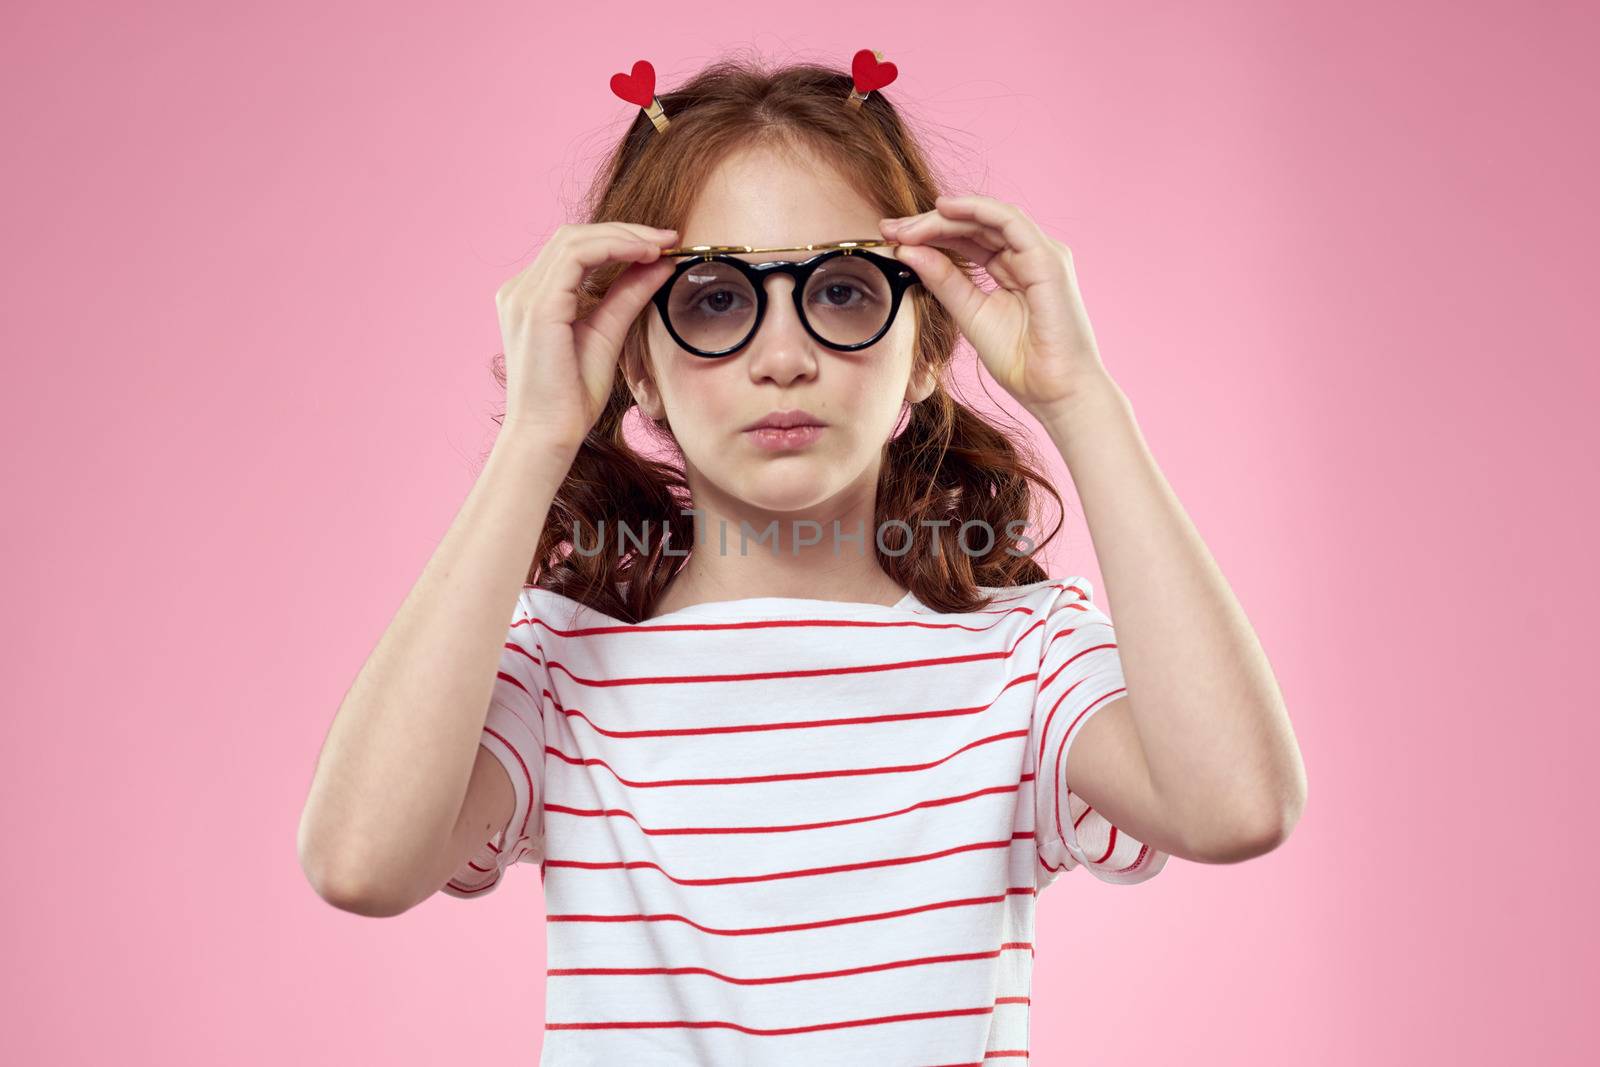 Cute girl sunglasses striped t-shirt lifestyle fun style pink background. High quality photo